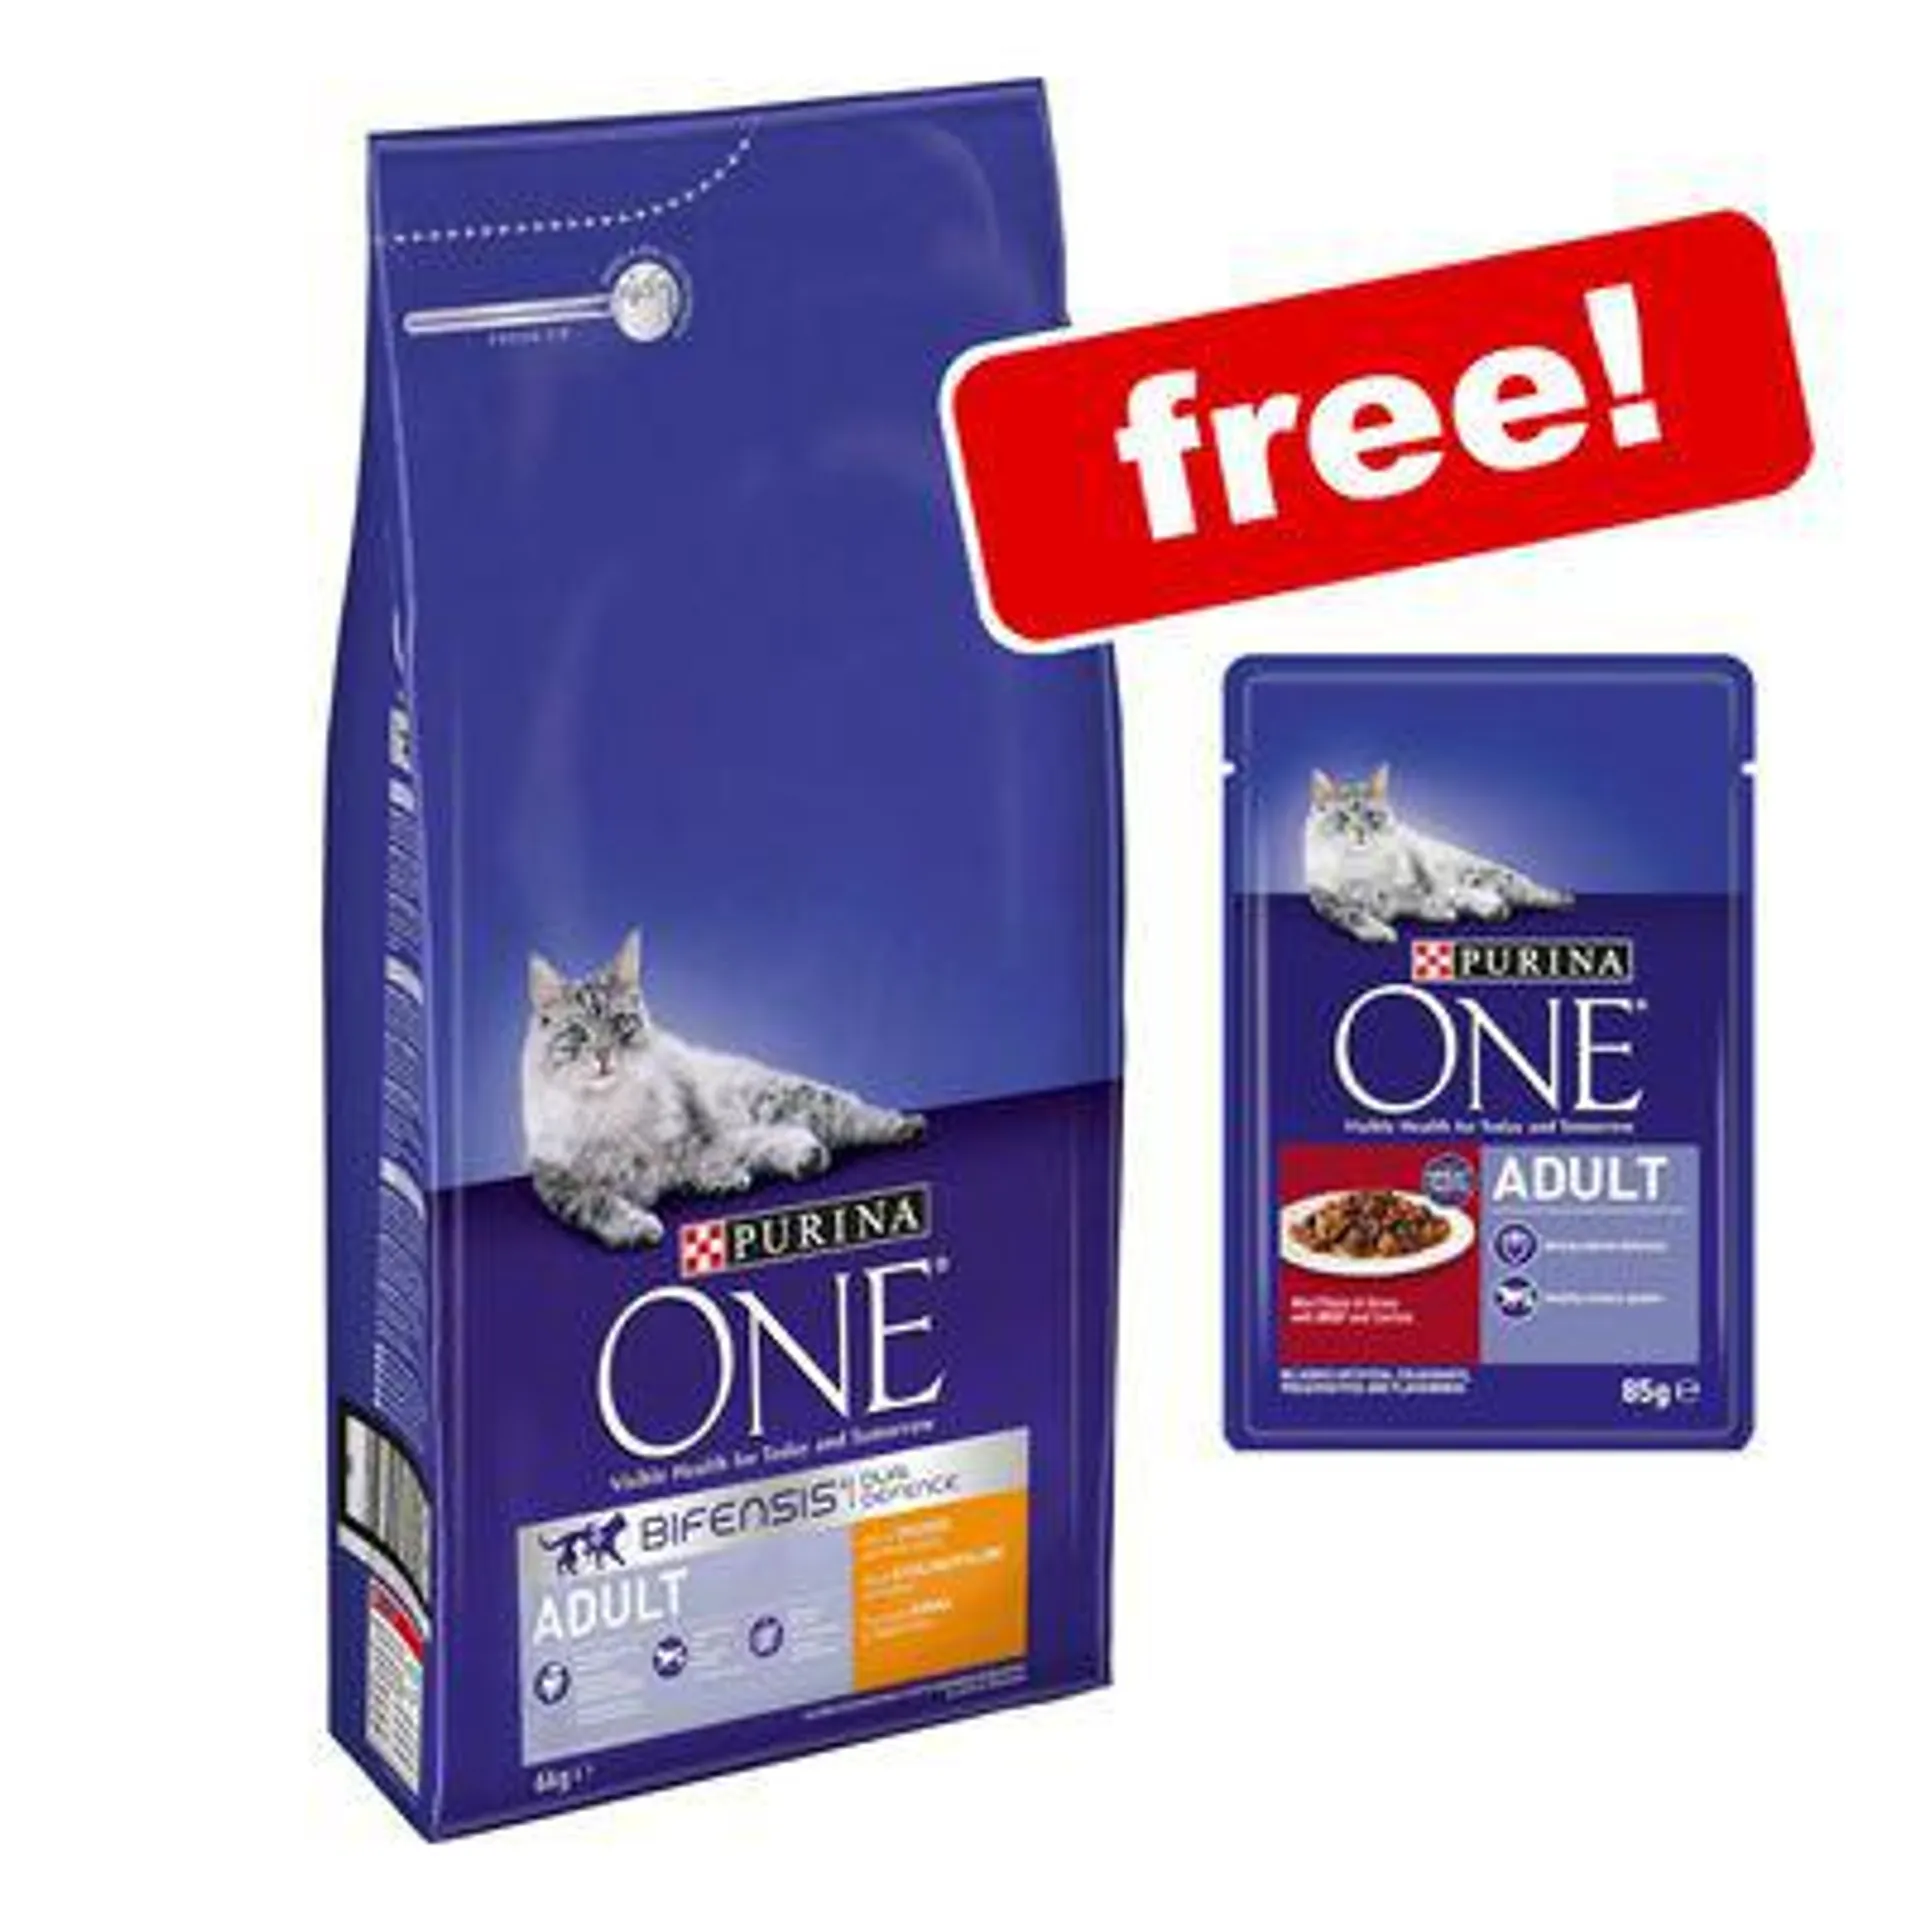 6kg Purina ONE Adult Chicken Dry Cat Food + 8 x 85g Wet Food Free! *